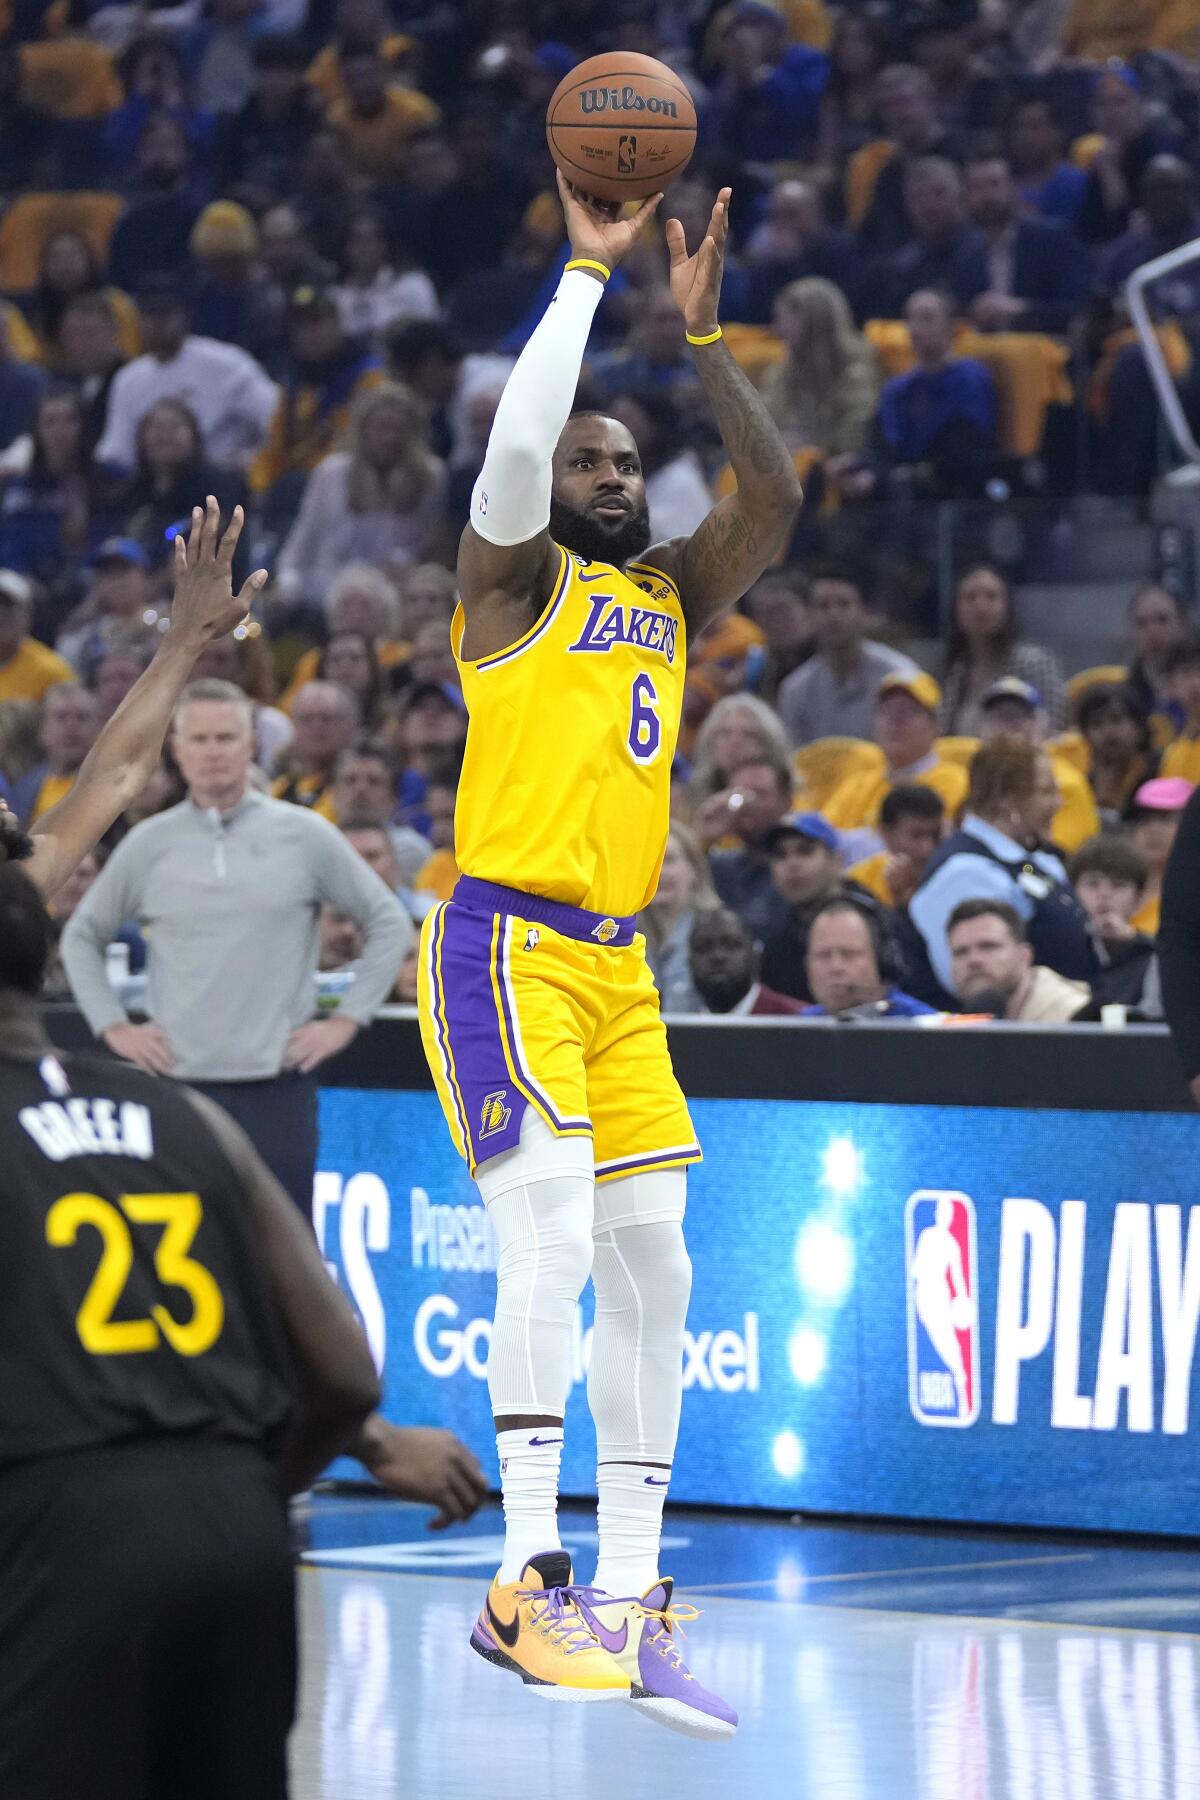 Lakers forward LeBron James pulls up for a jump shot against the Warriors in Game 1.